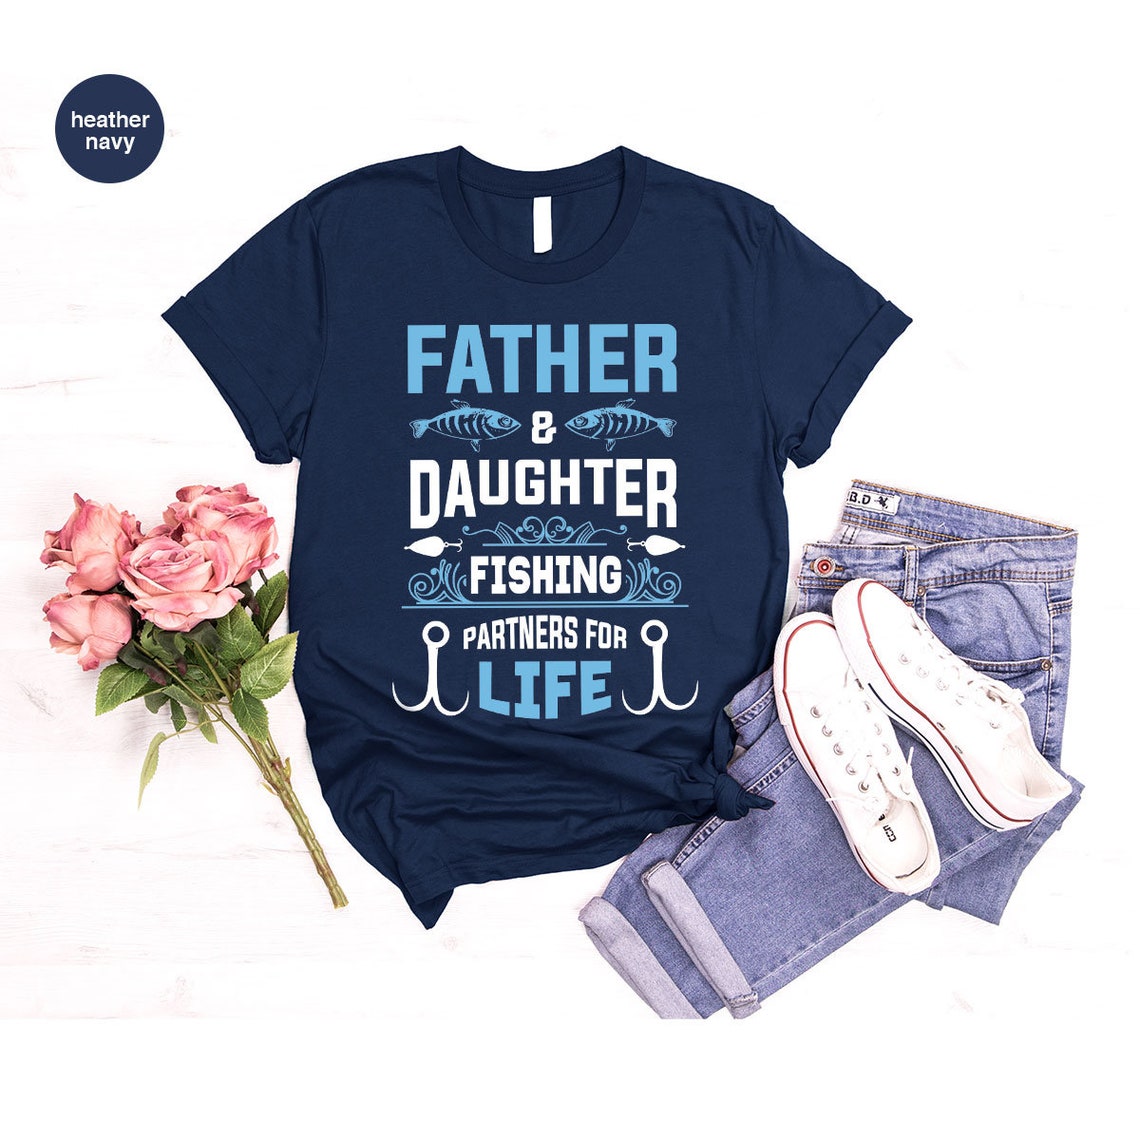 Father and Daughter Tshirts for Fishing Partners - StirTshirt